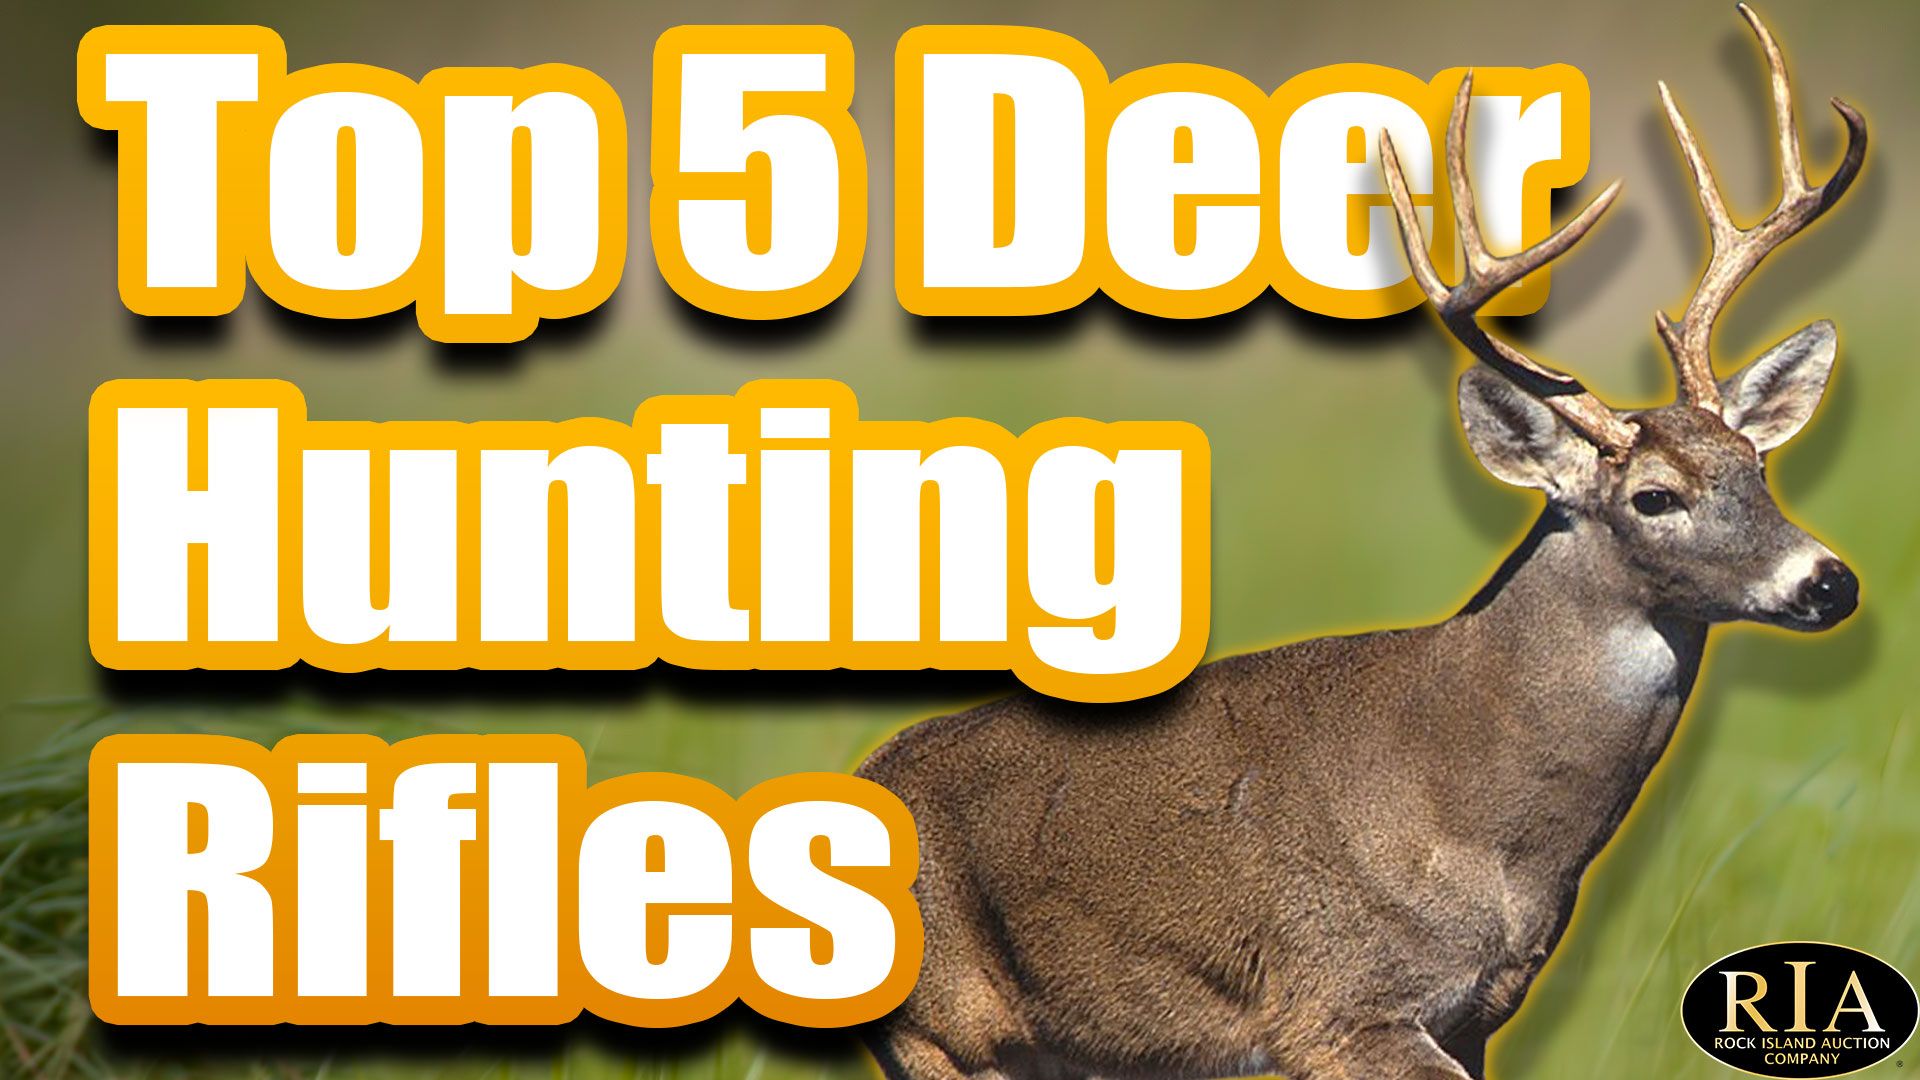 Top 5 Deer Hunting Rifles in Our October Firearms Auction | Rock Island ...